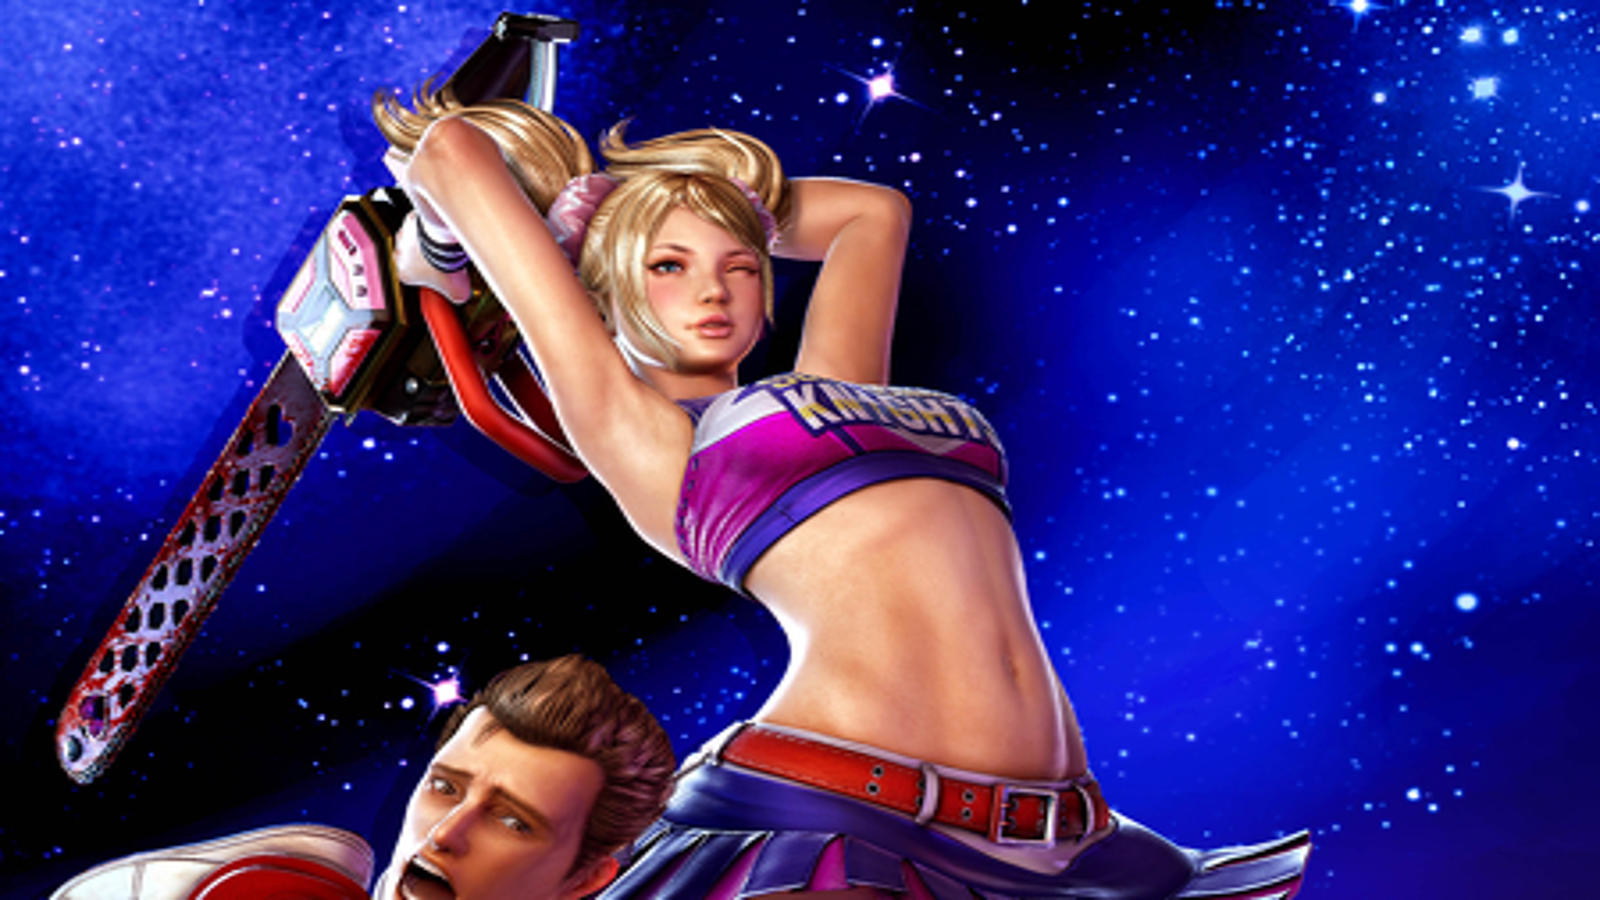 UK Top 40: FIFA 12 back top while Lollipop Chainsaw scores fourth